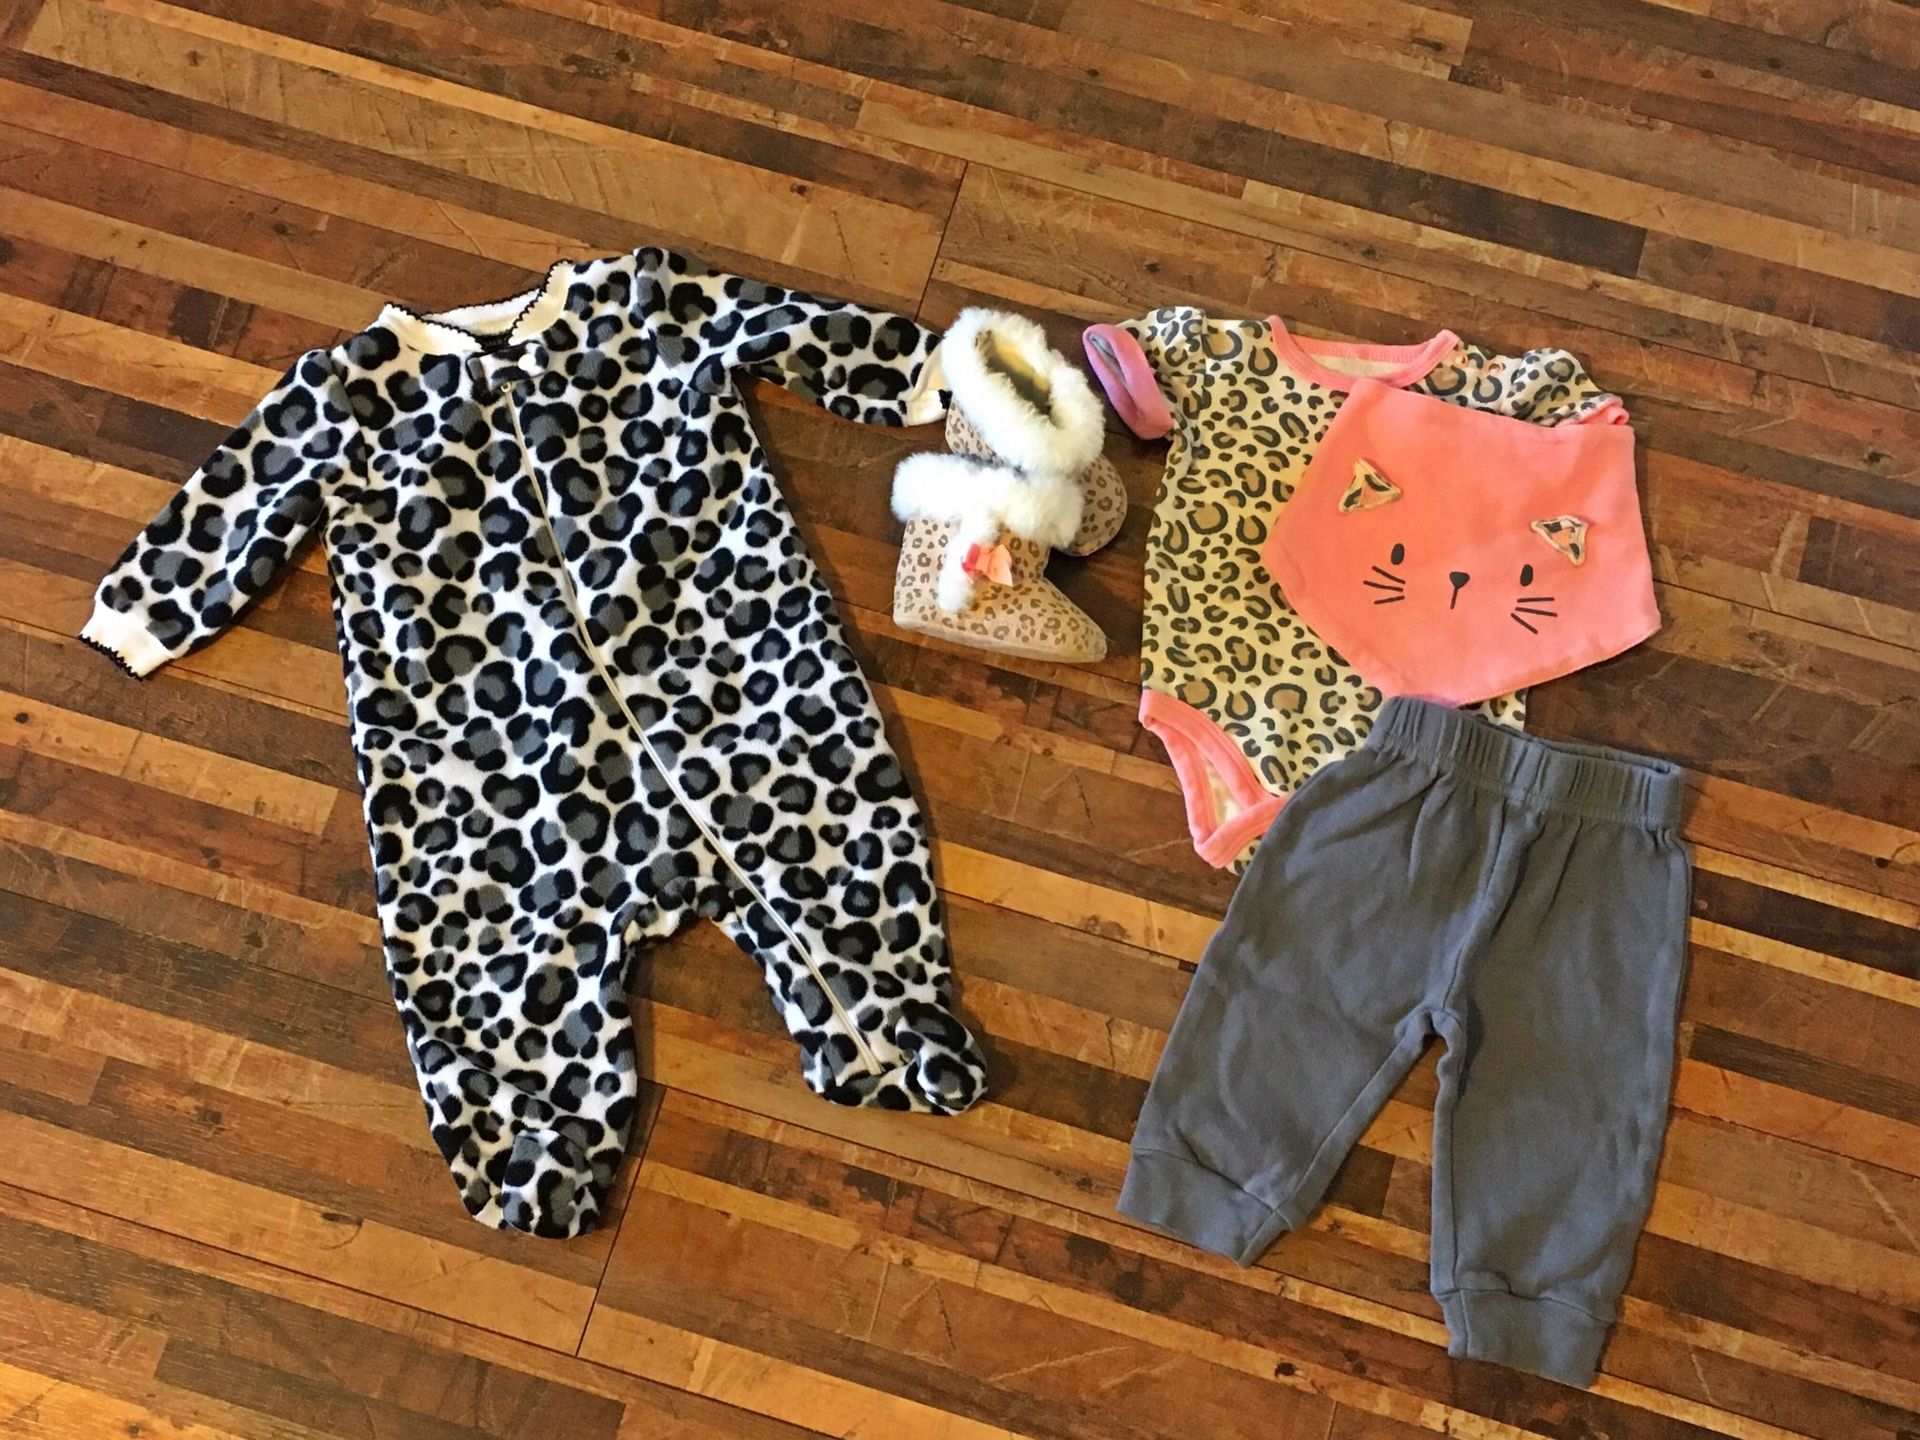 Infant outfit, pj’s and booties